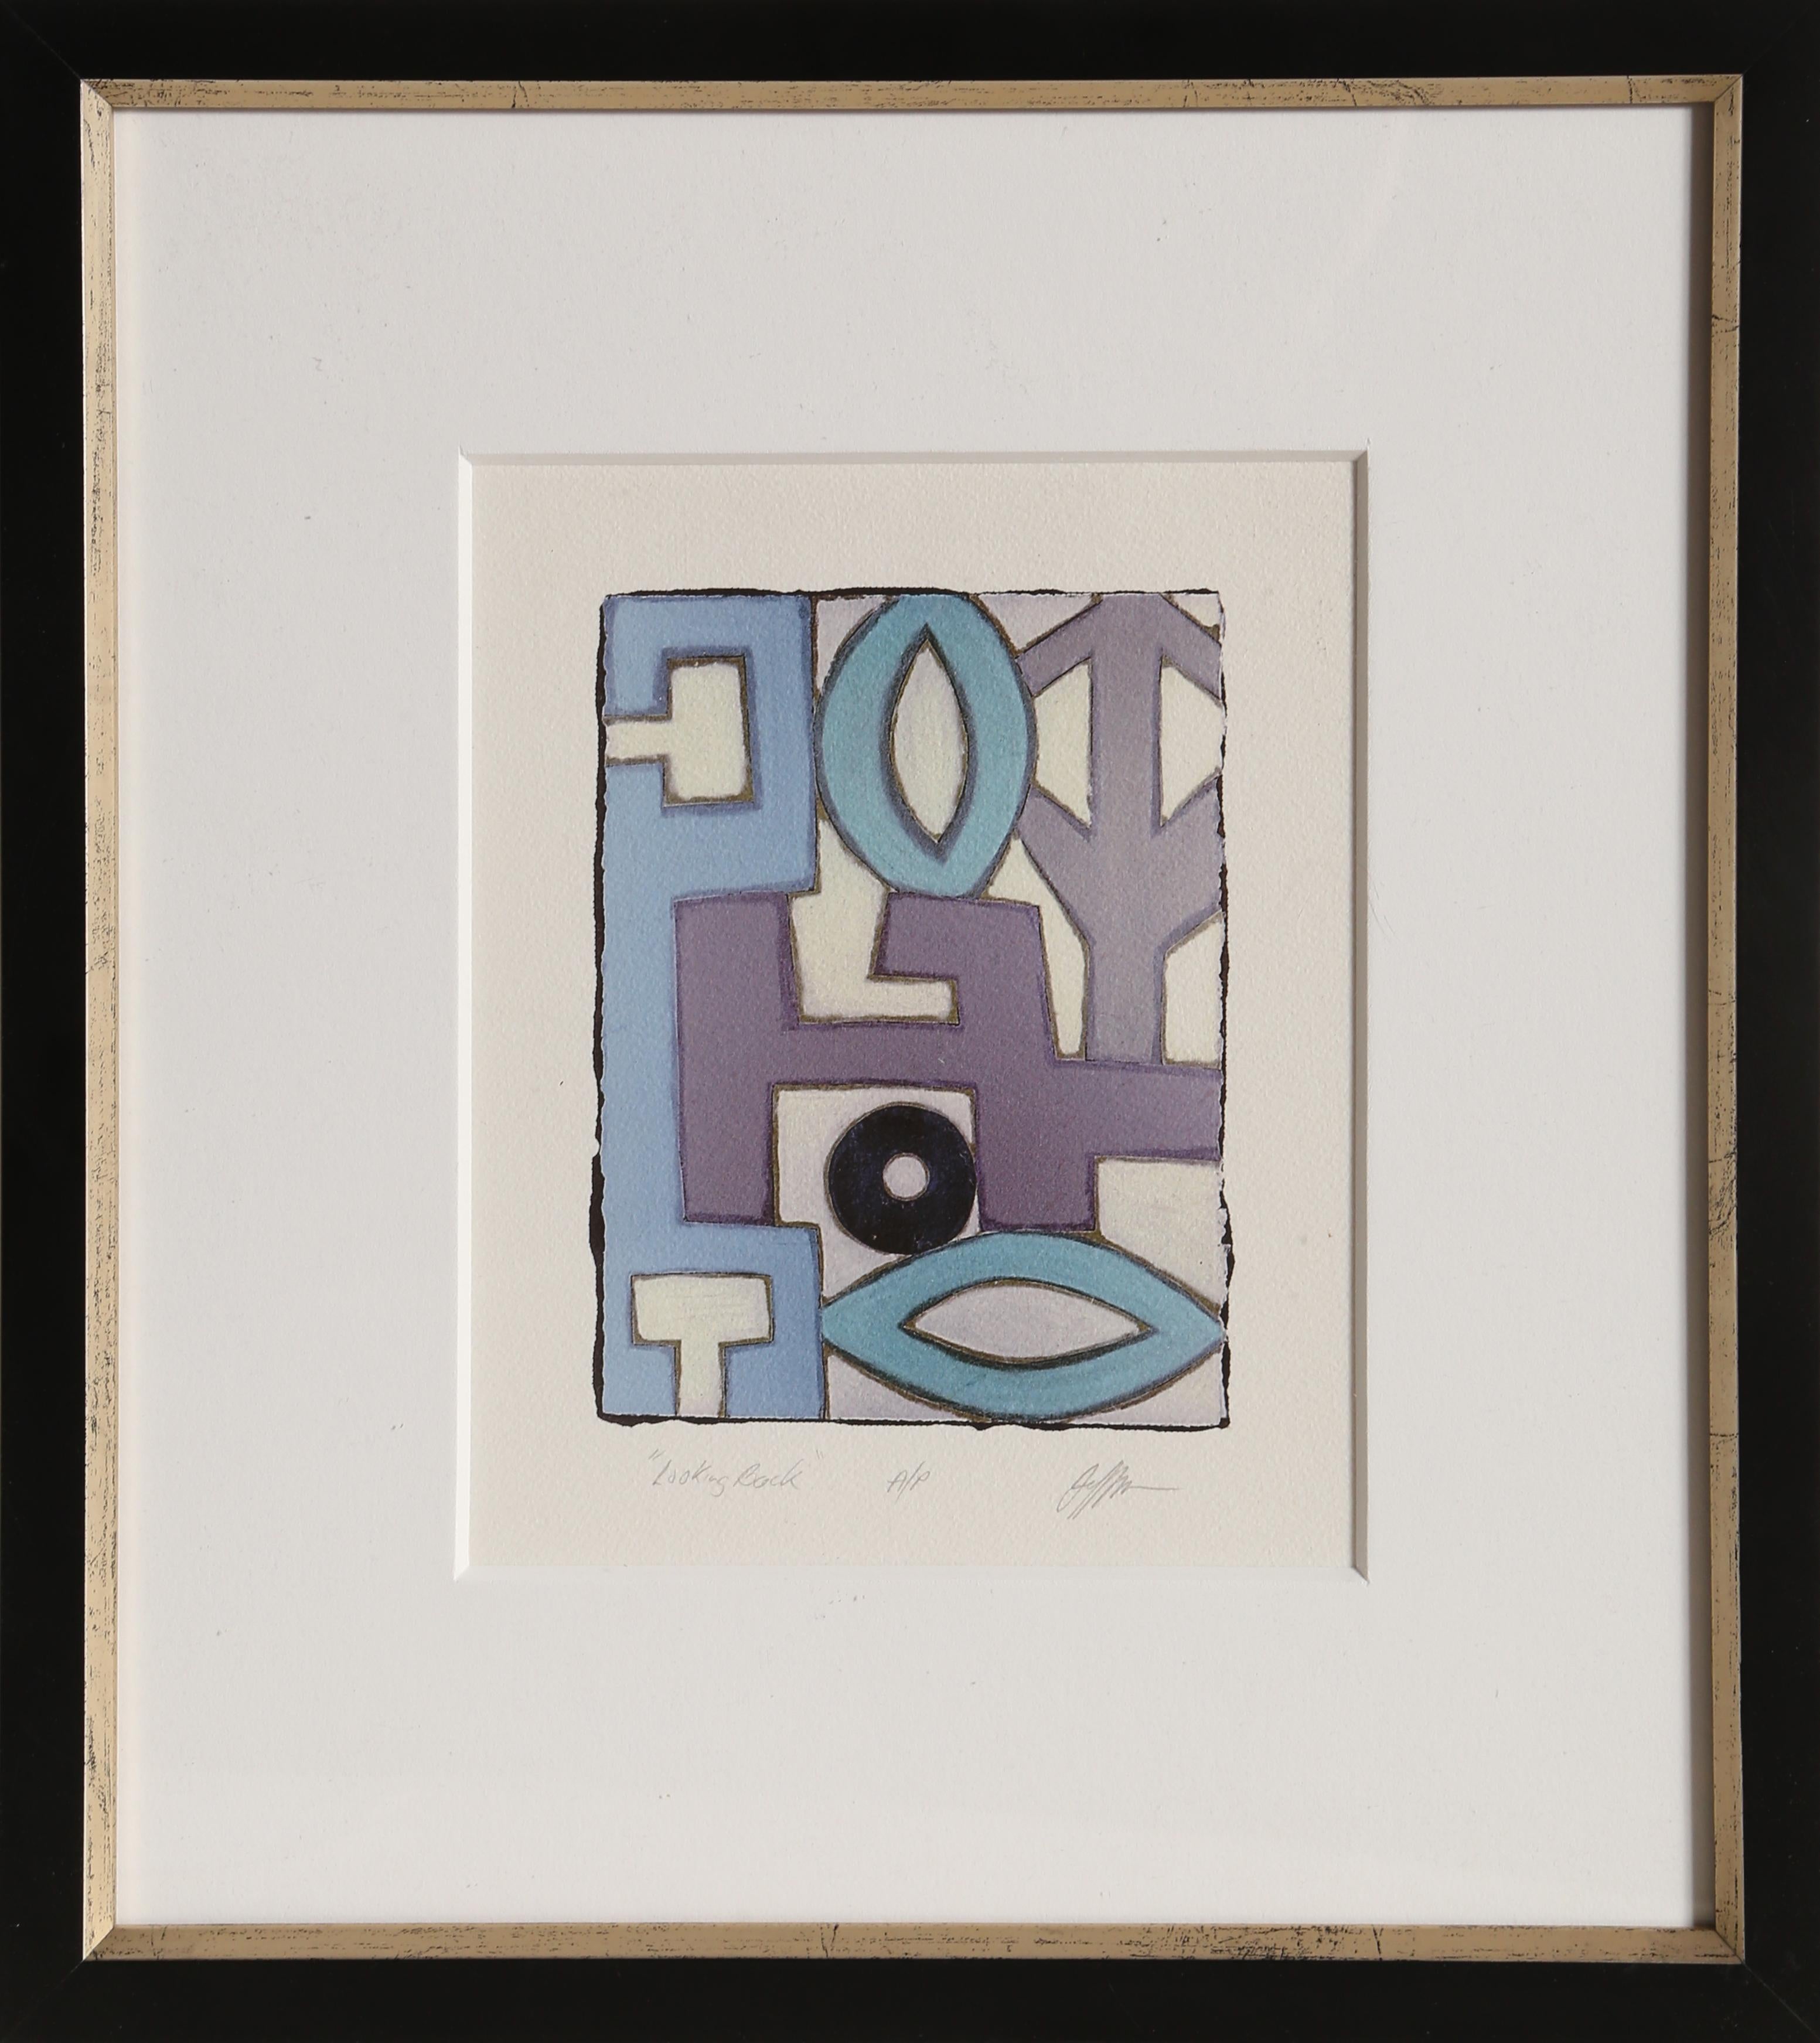 Artist: Jeffrey Maron, American (1949 -  )
Title: Looking Back 
Year: 2000
Medium: Iris print on Rag paper, signed, titled, and numbered in pencil 
Edition: A/P
Image Size: 7 x 5 inches
Frame: 16 x 14.5 inches